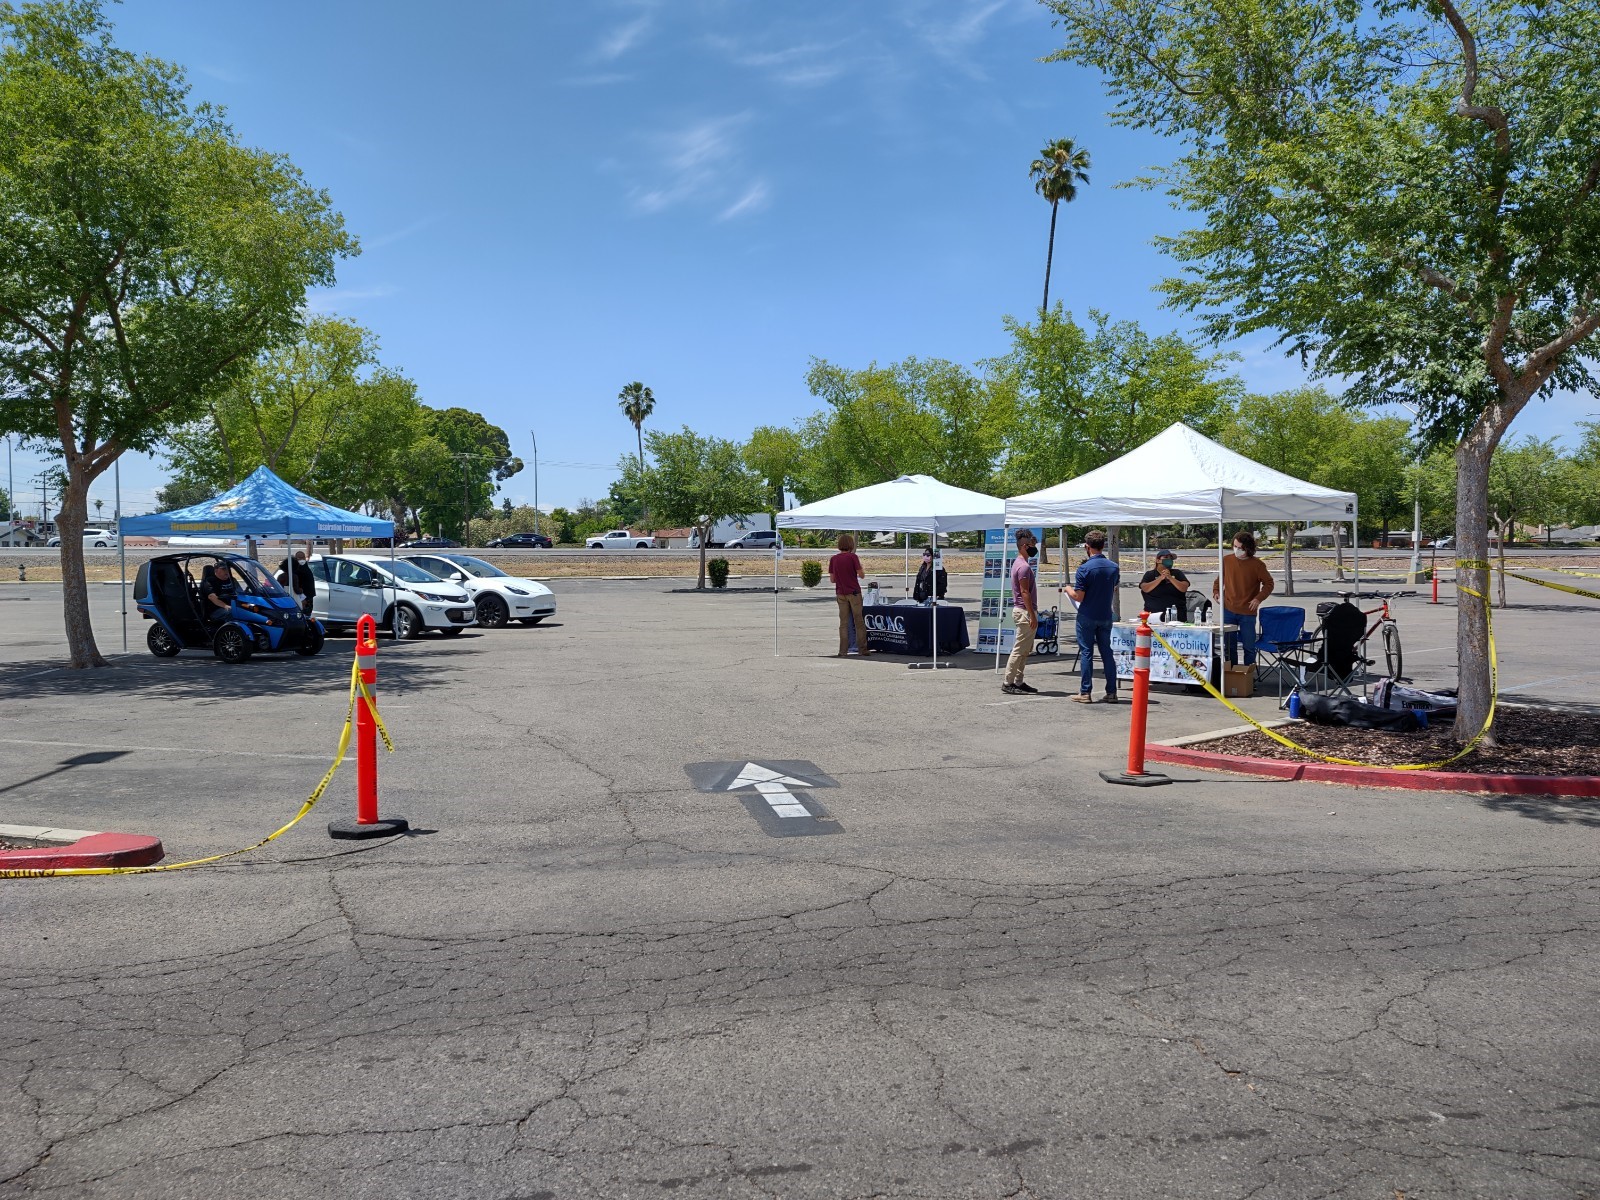 Outdoor pop-up event with 3 easy up tents, electric vehicles on display, and event participants 